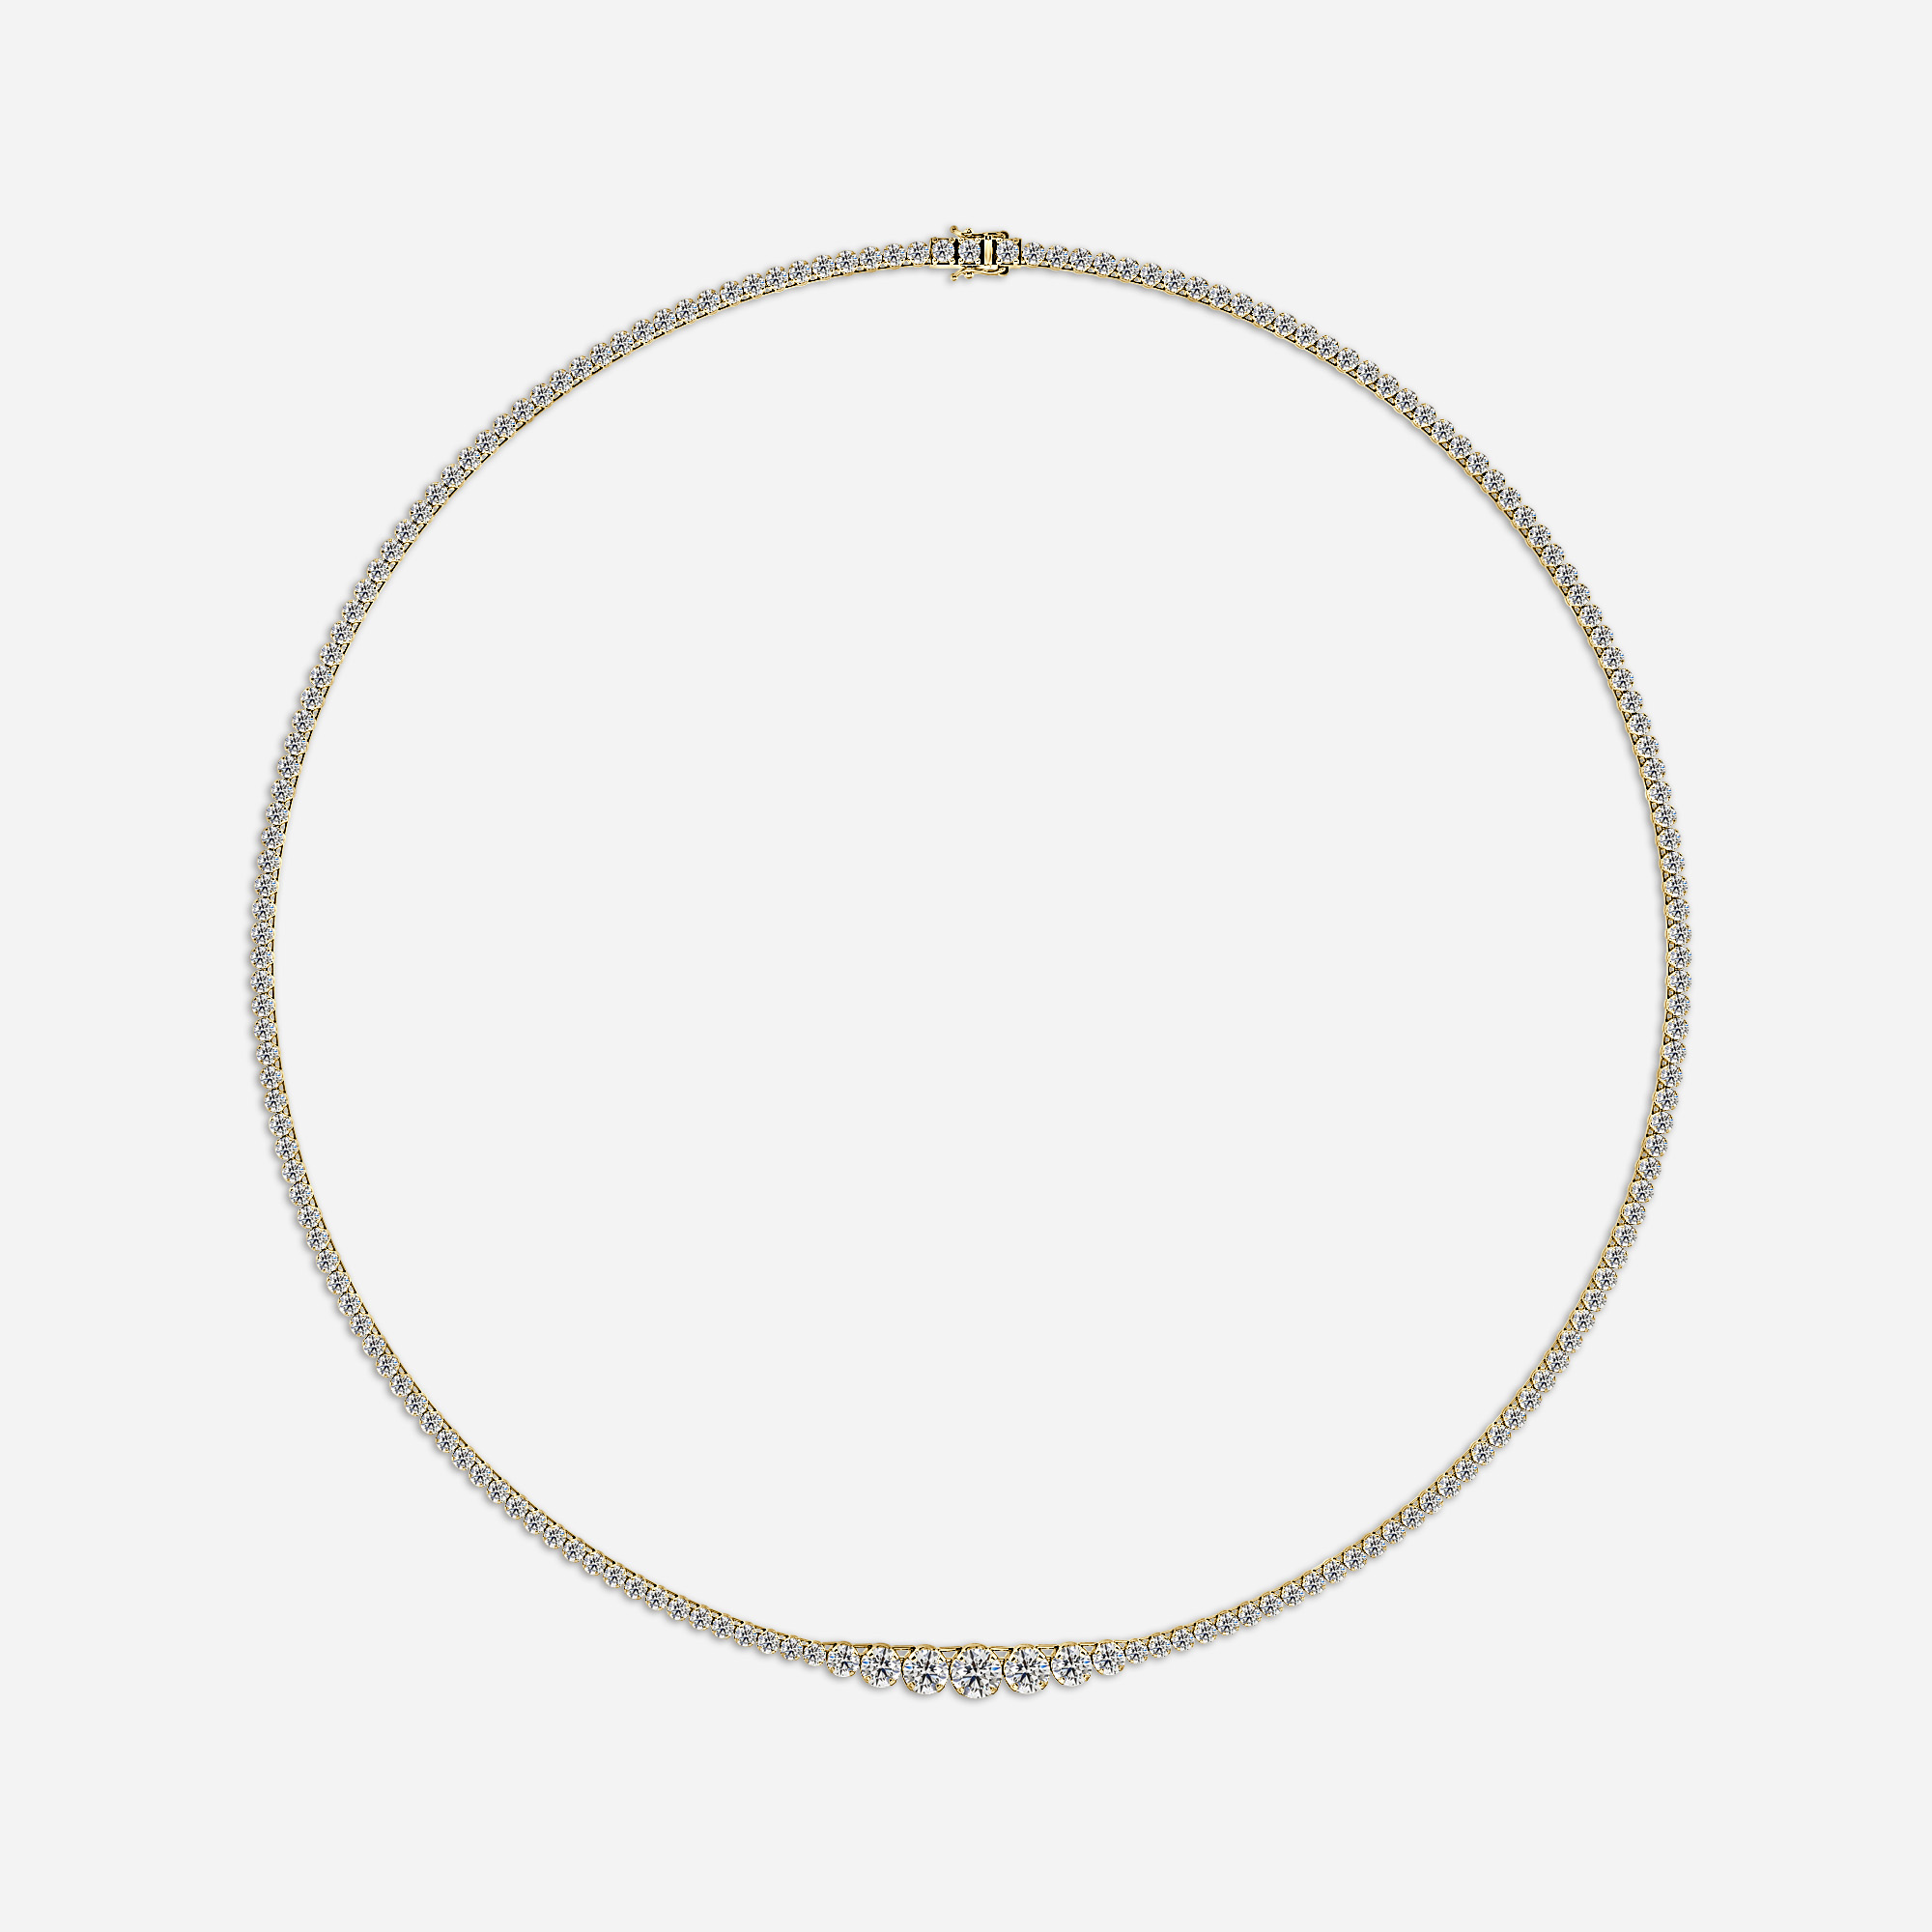 8.76 Ct Graduated Diamond Tennis Necklaces In Yellow Gold